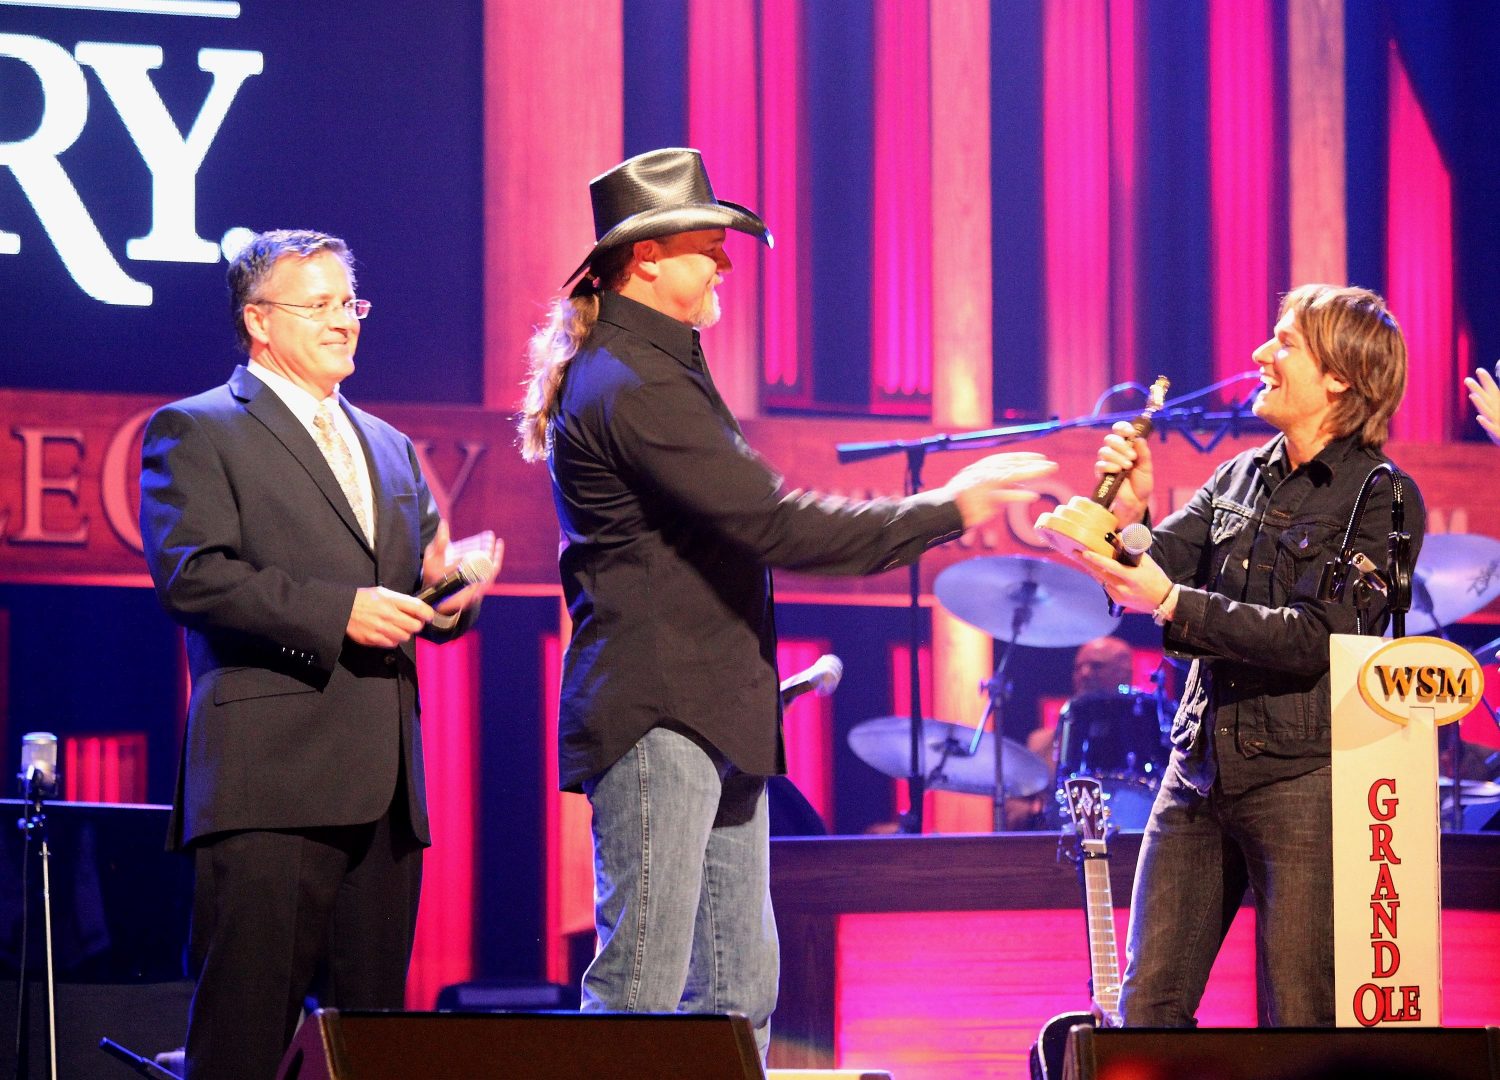 Grand Ole Opry How Inductees Are Chosen to Join Famed Society Sounds